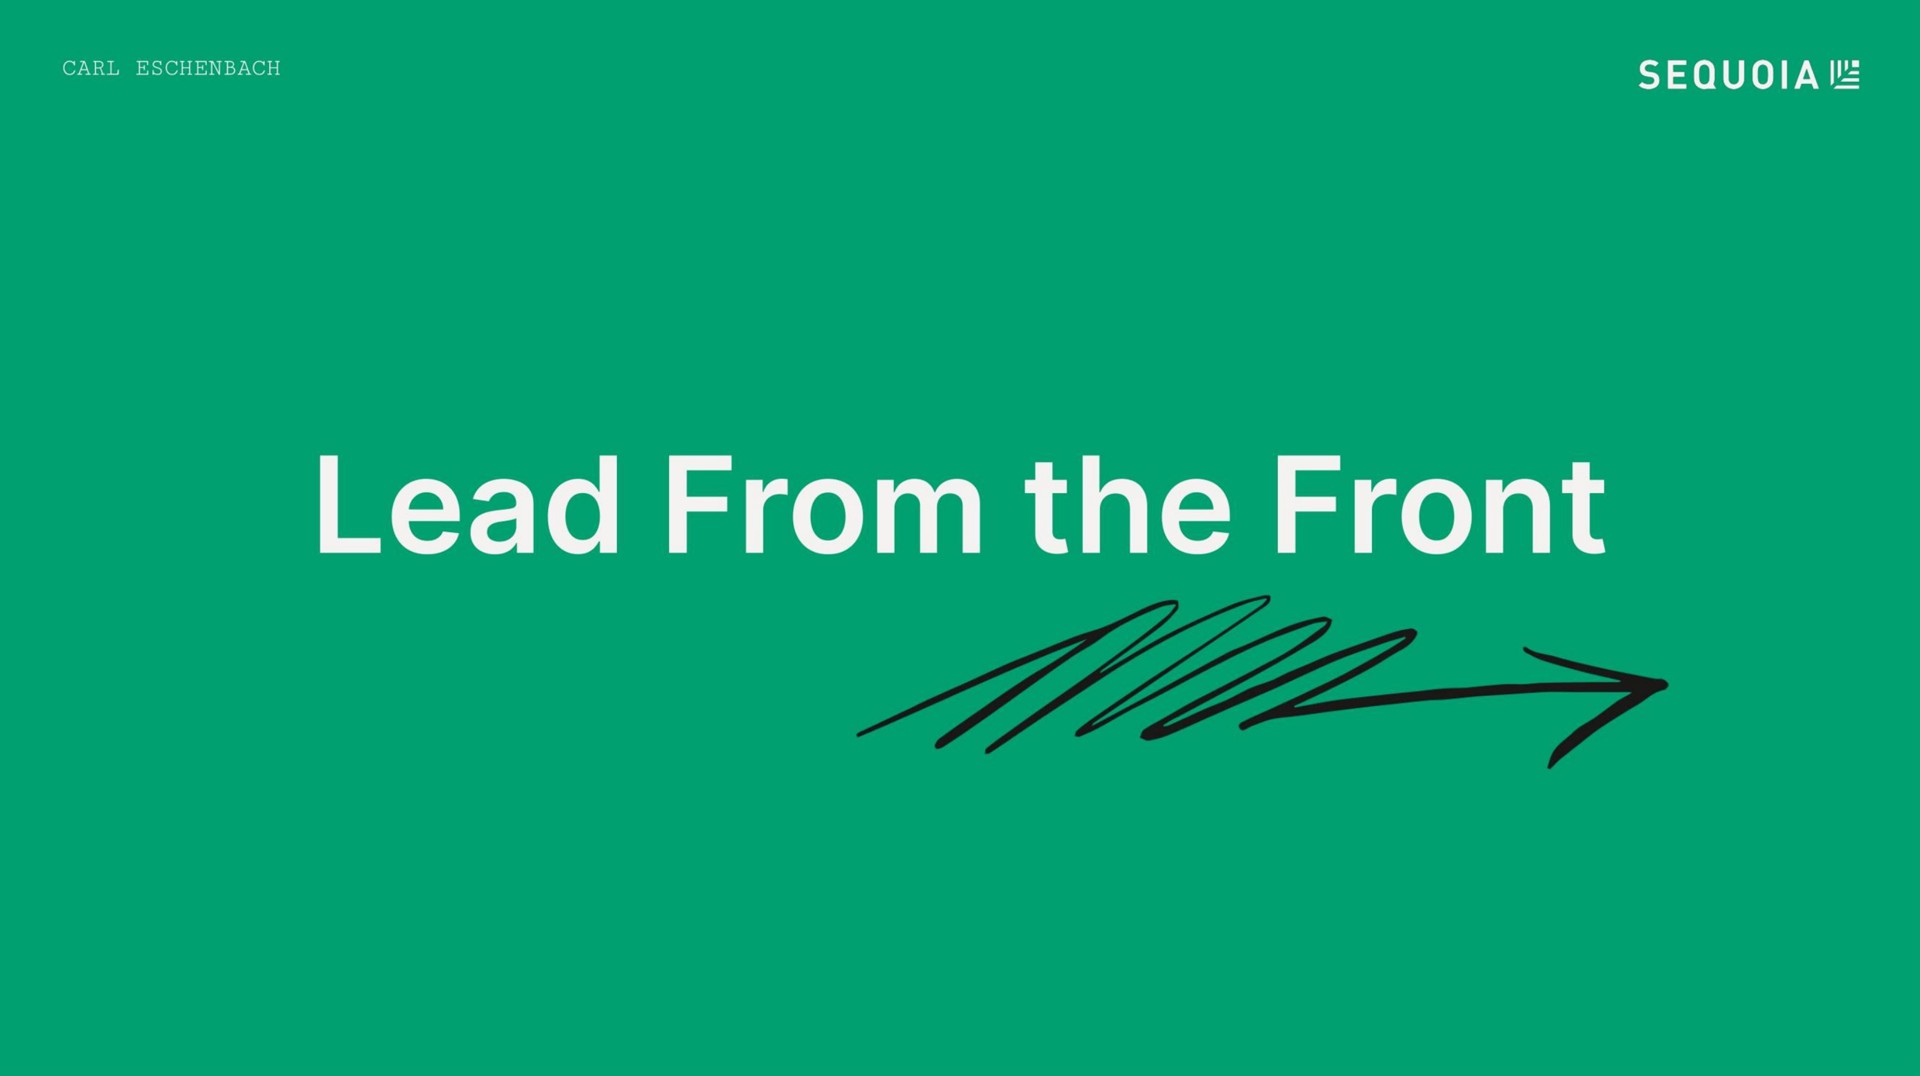 lead from the front | Sequoia Capital